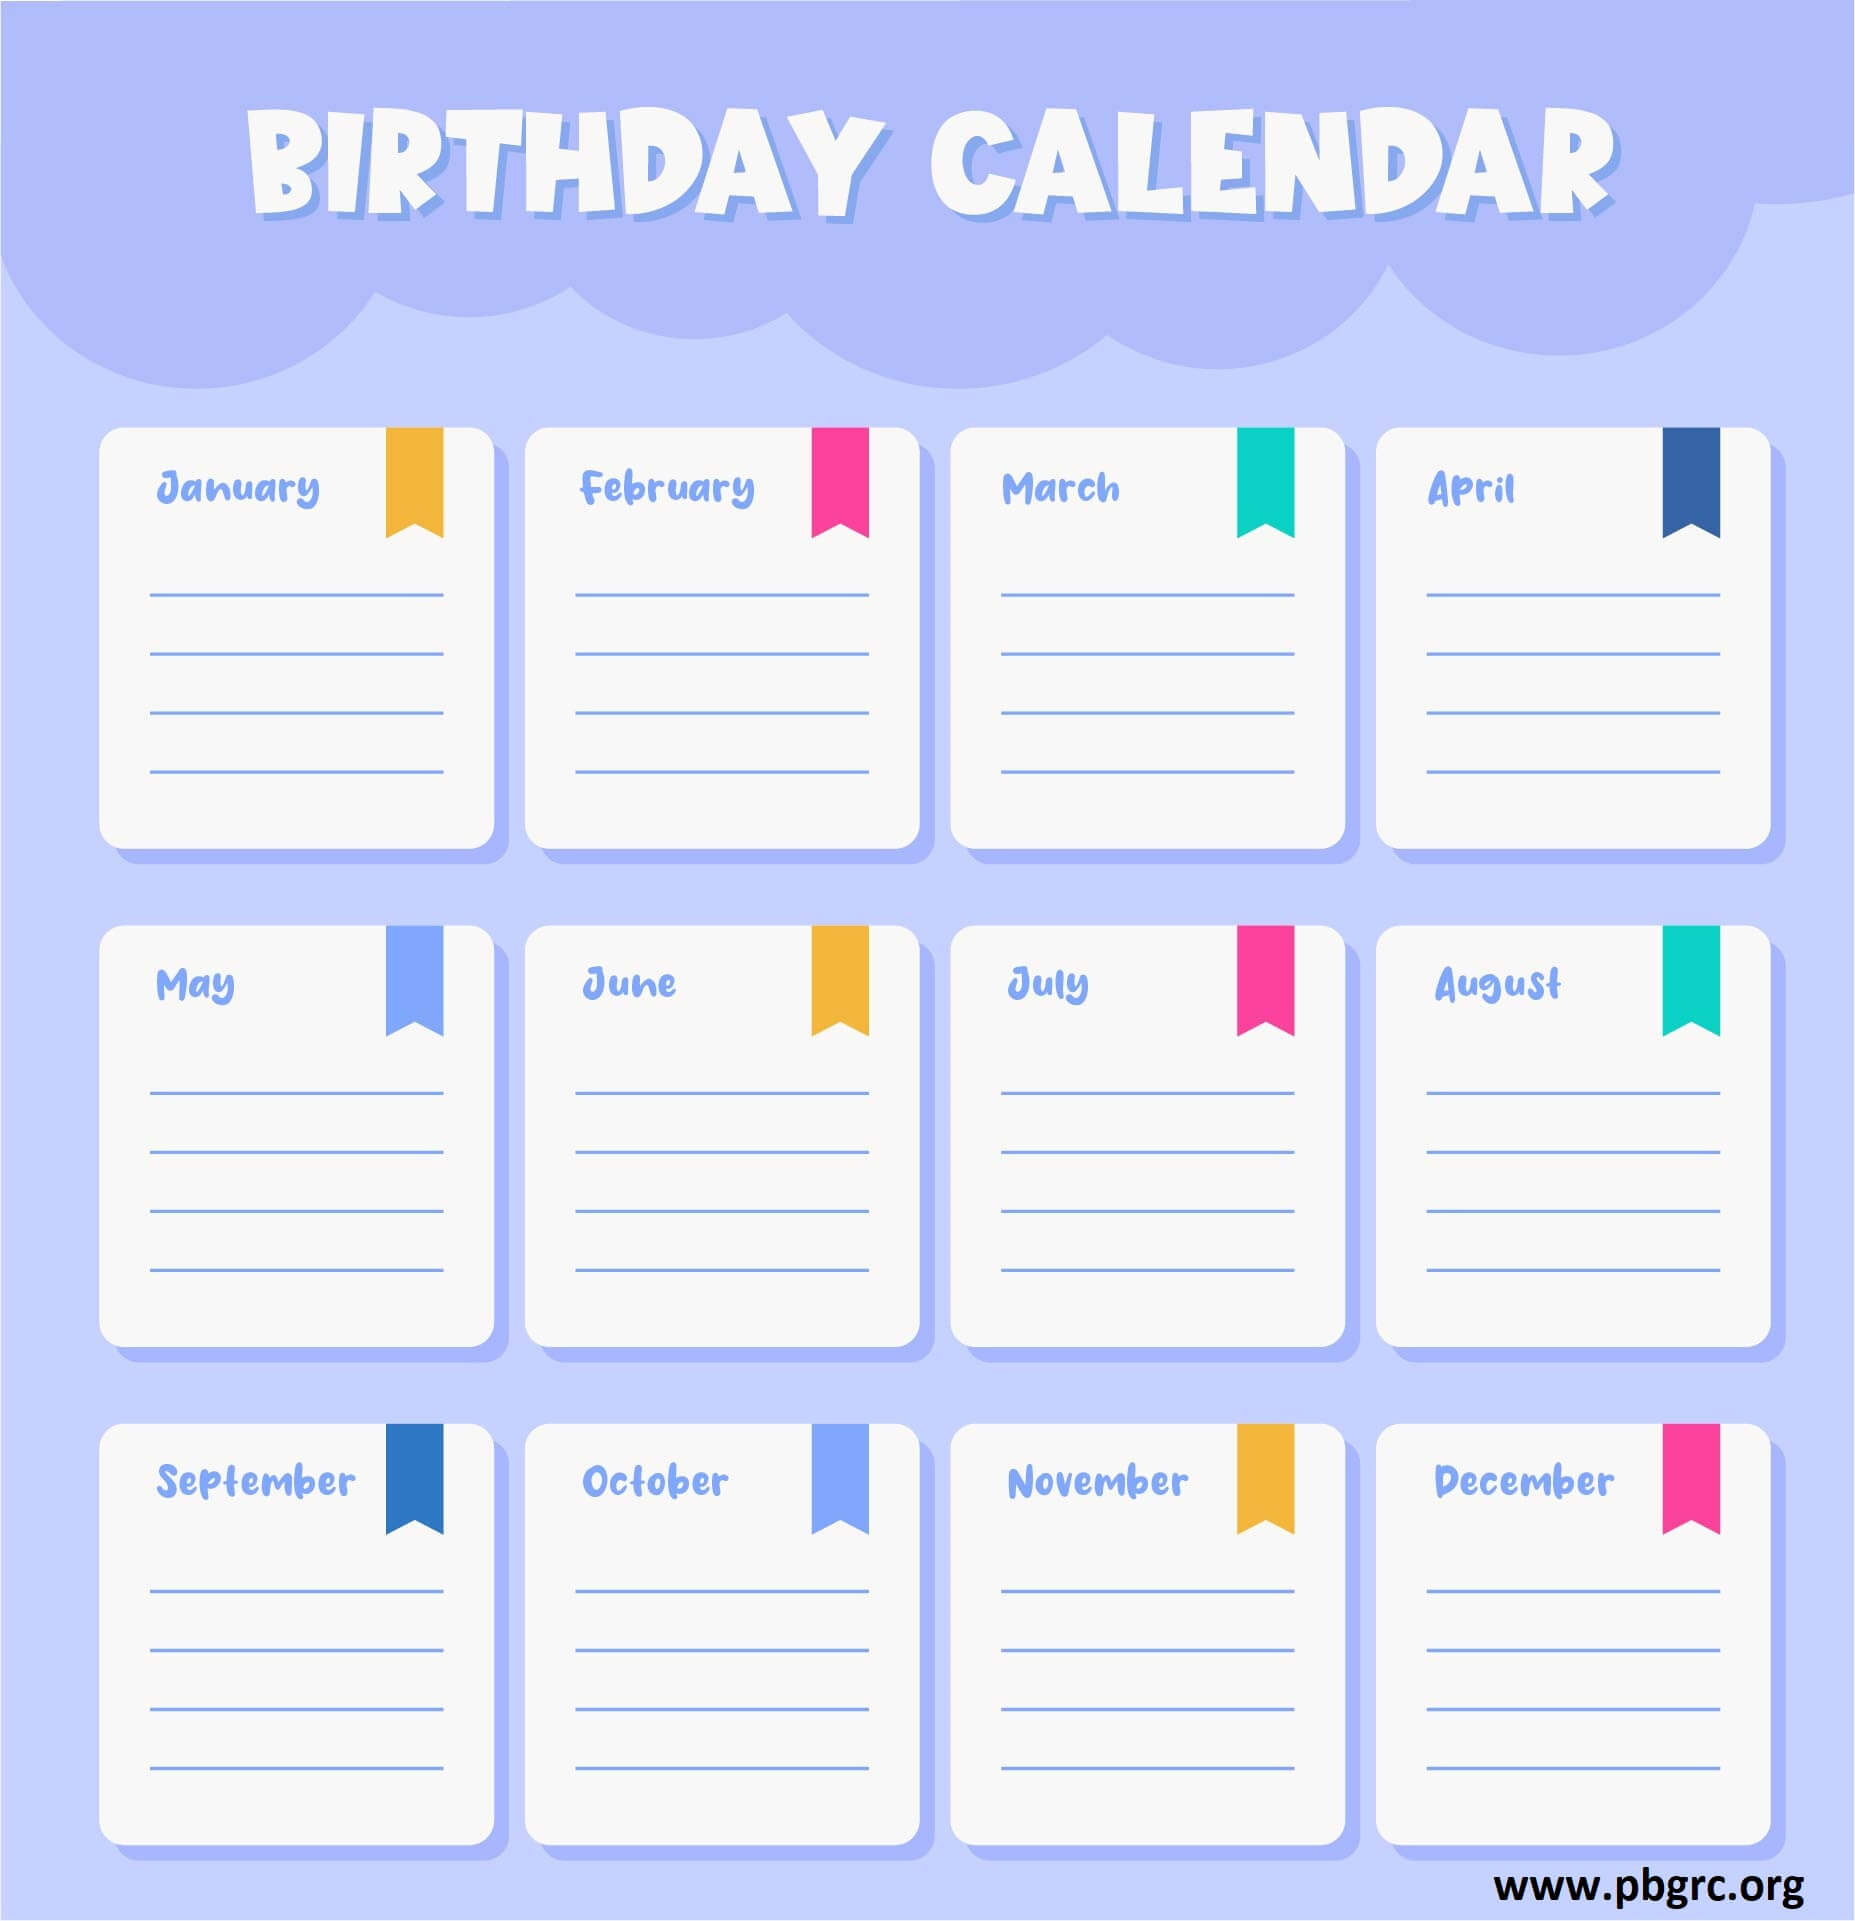 free birthday calendar for the workplace 26